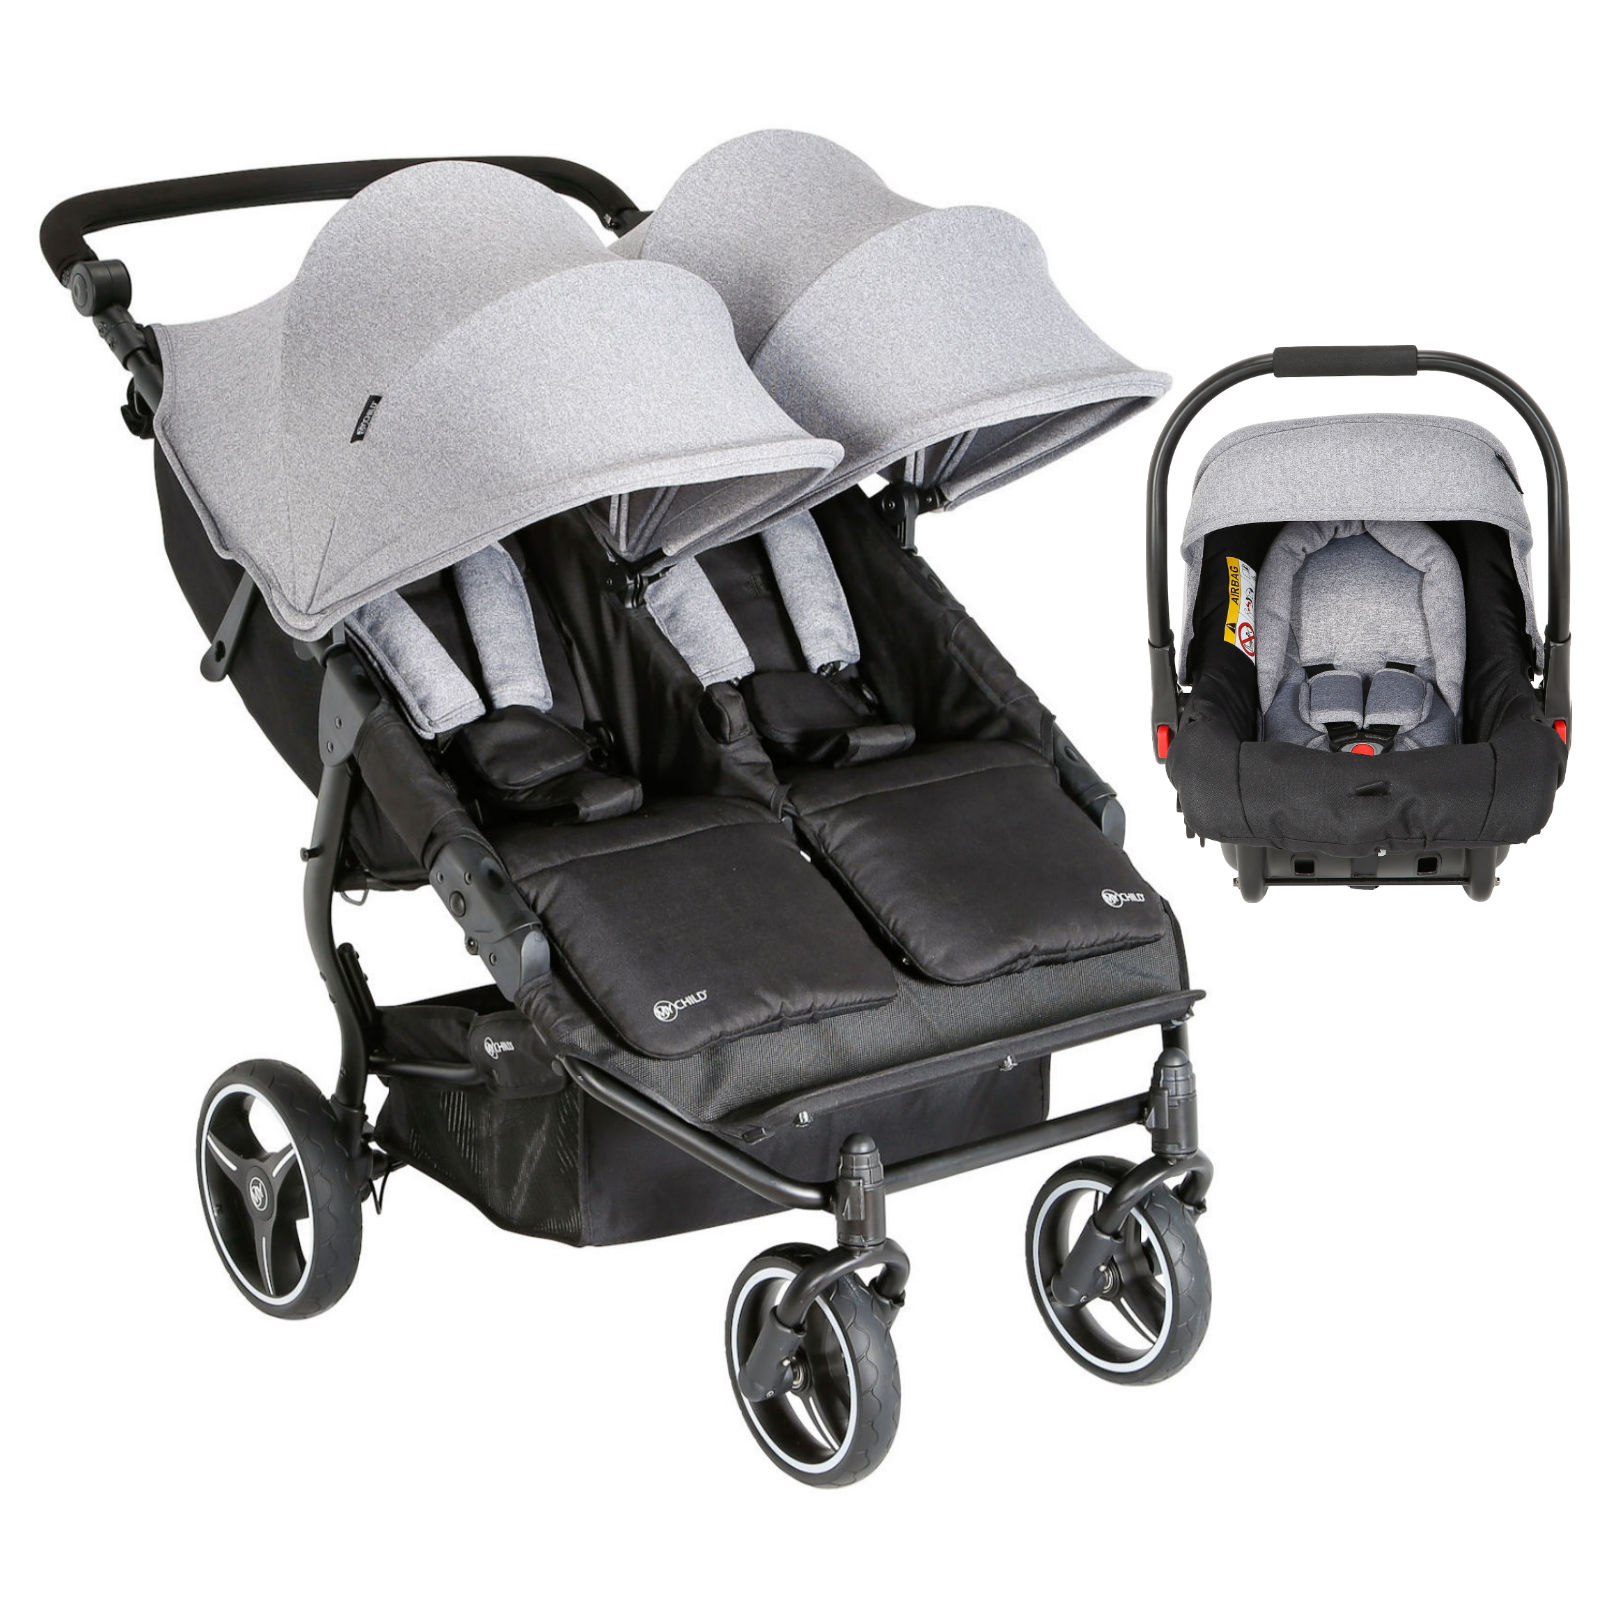 twin stroller with car seats included